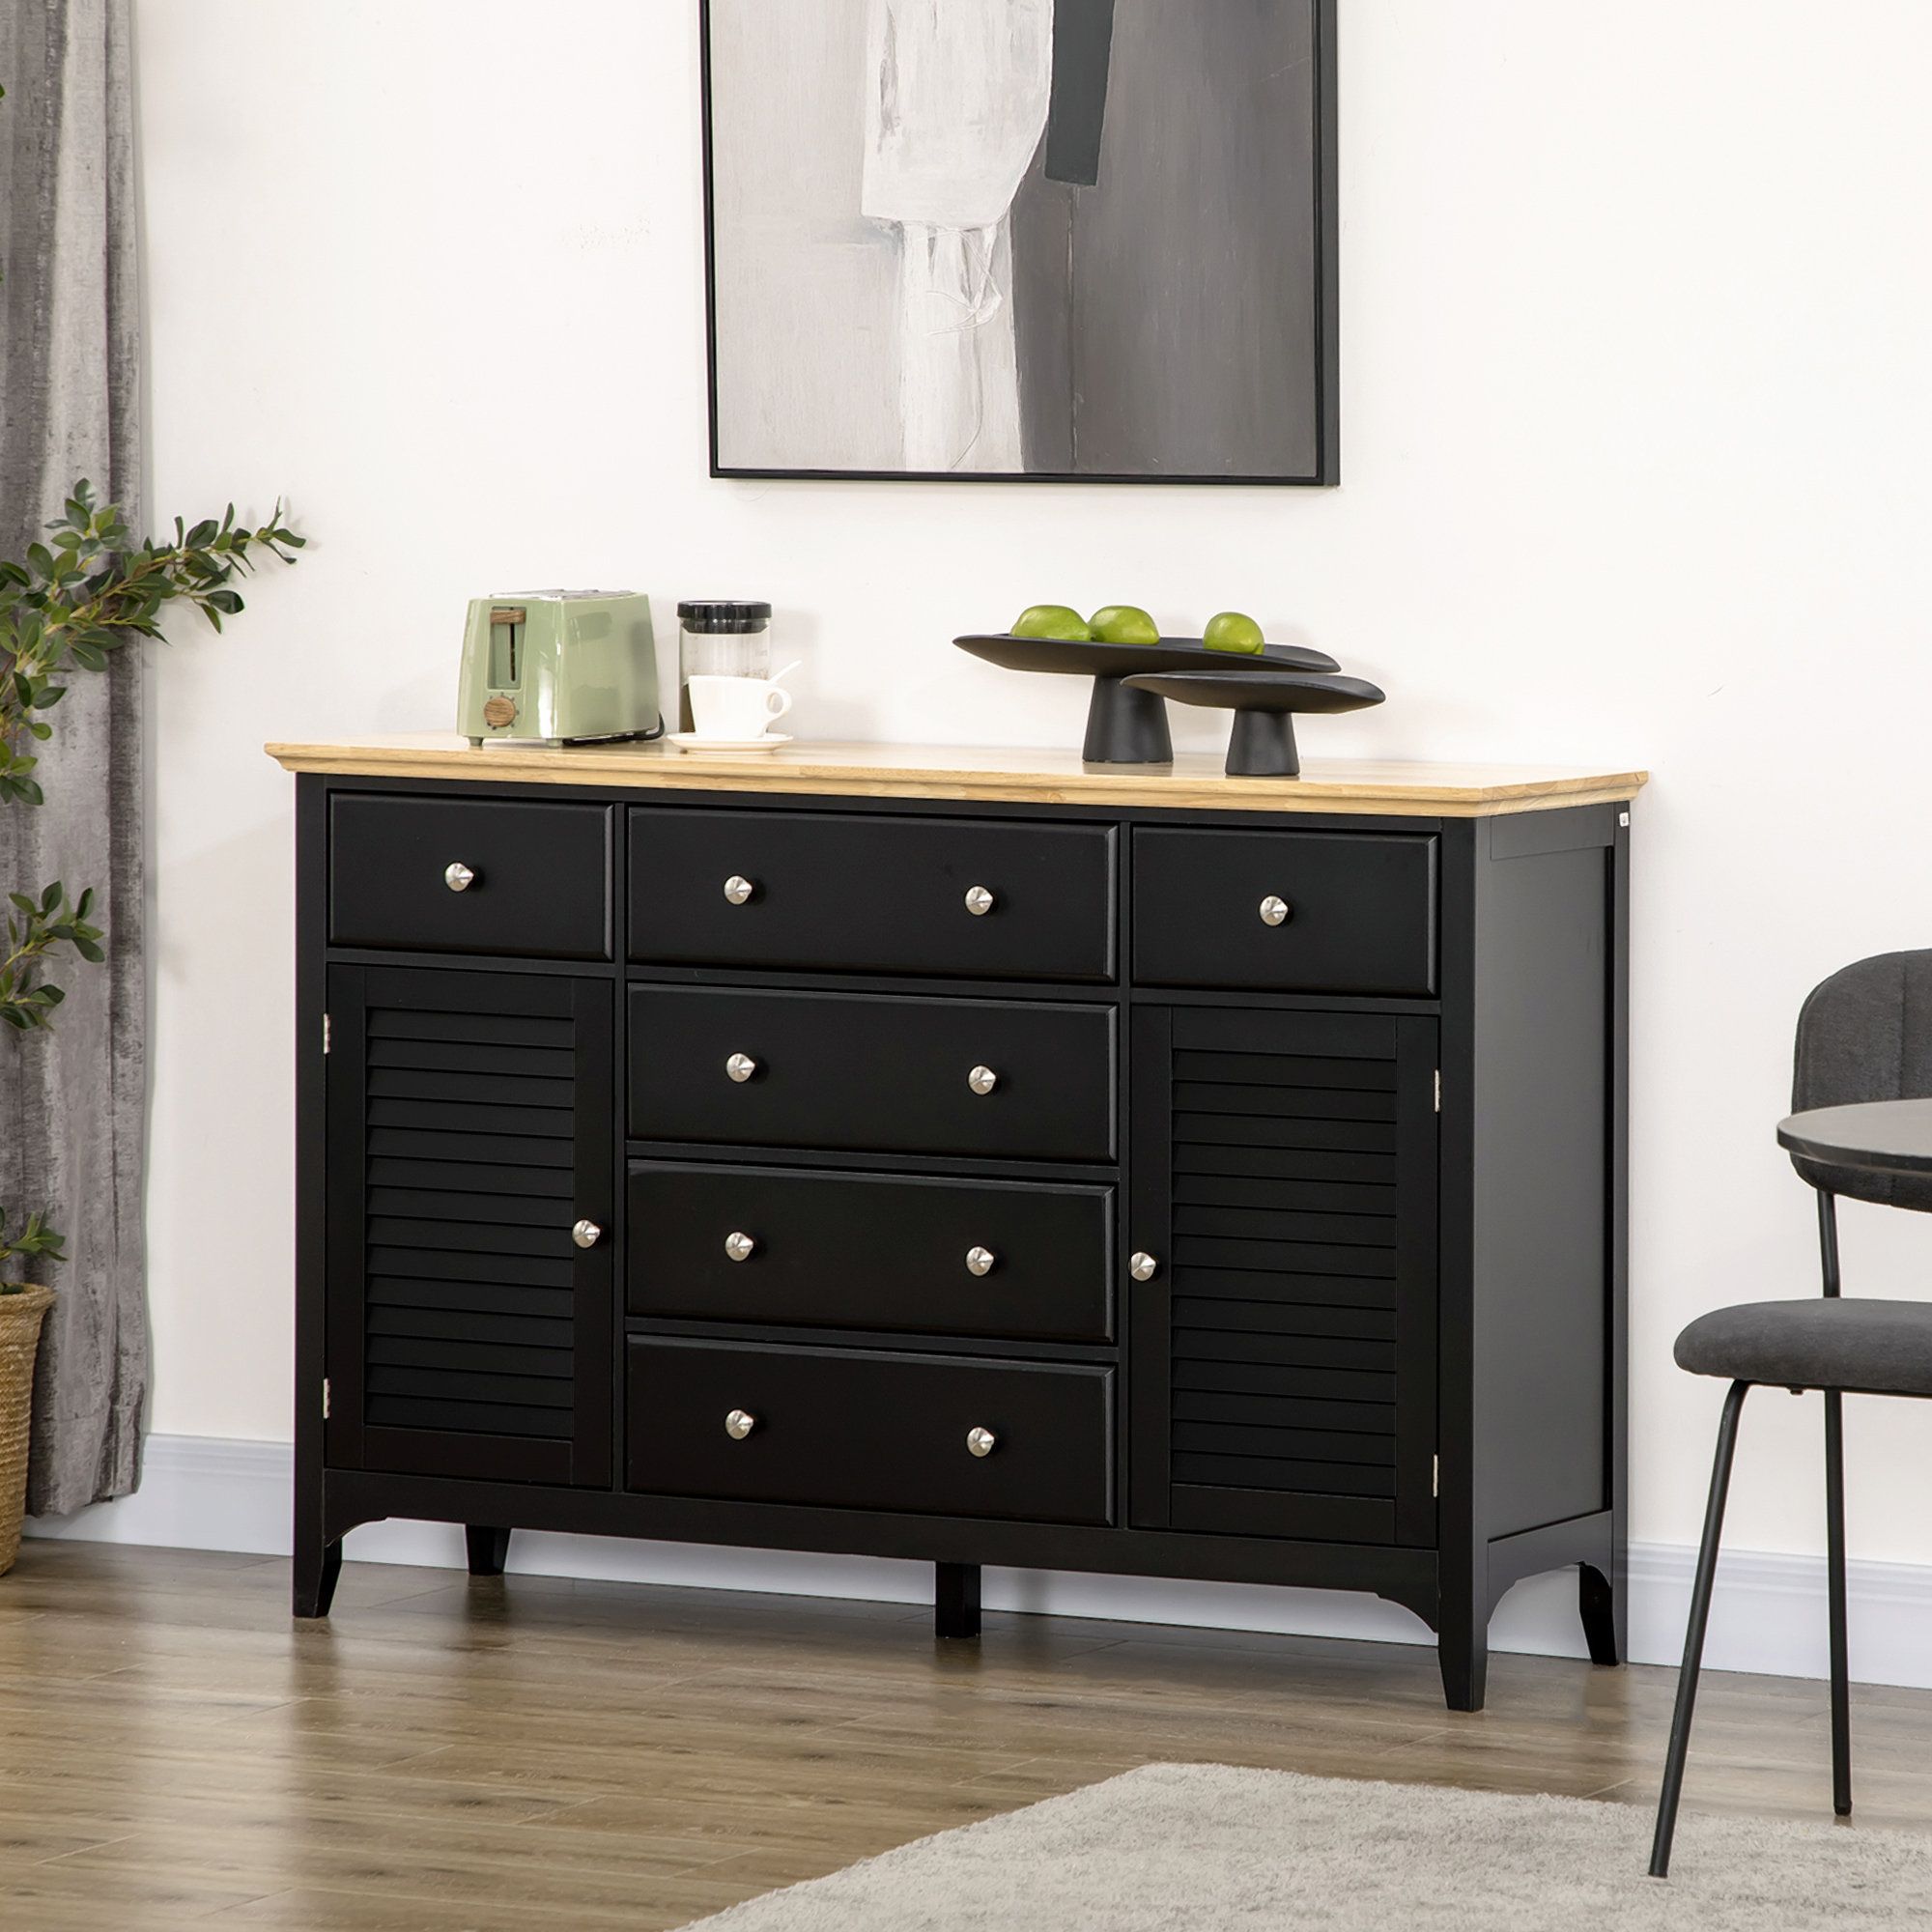 Homcom 55'' Sideboard | Wayfair With Sideboards With Rubberwood Top (View 5 of 15)